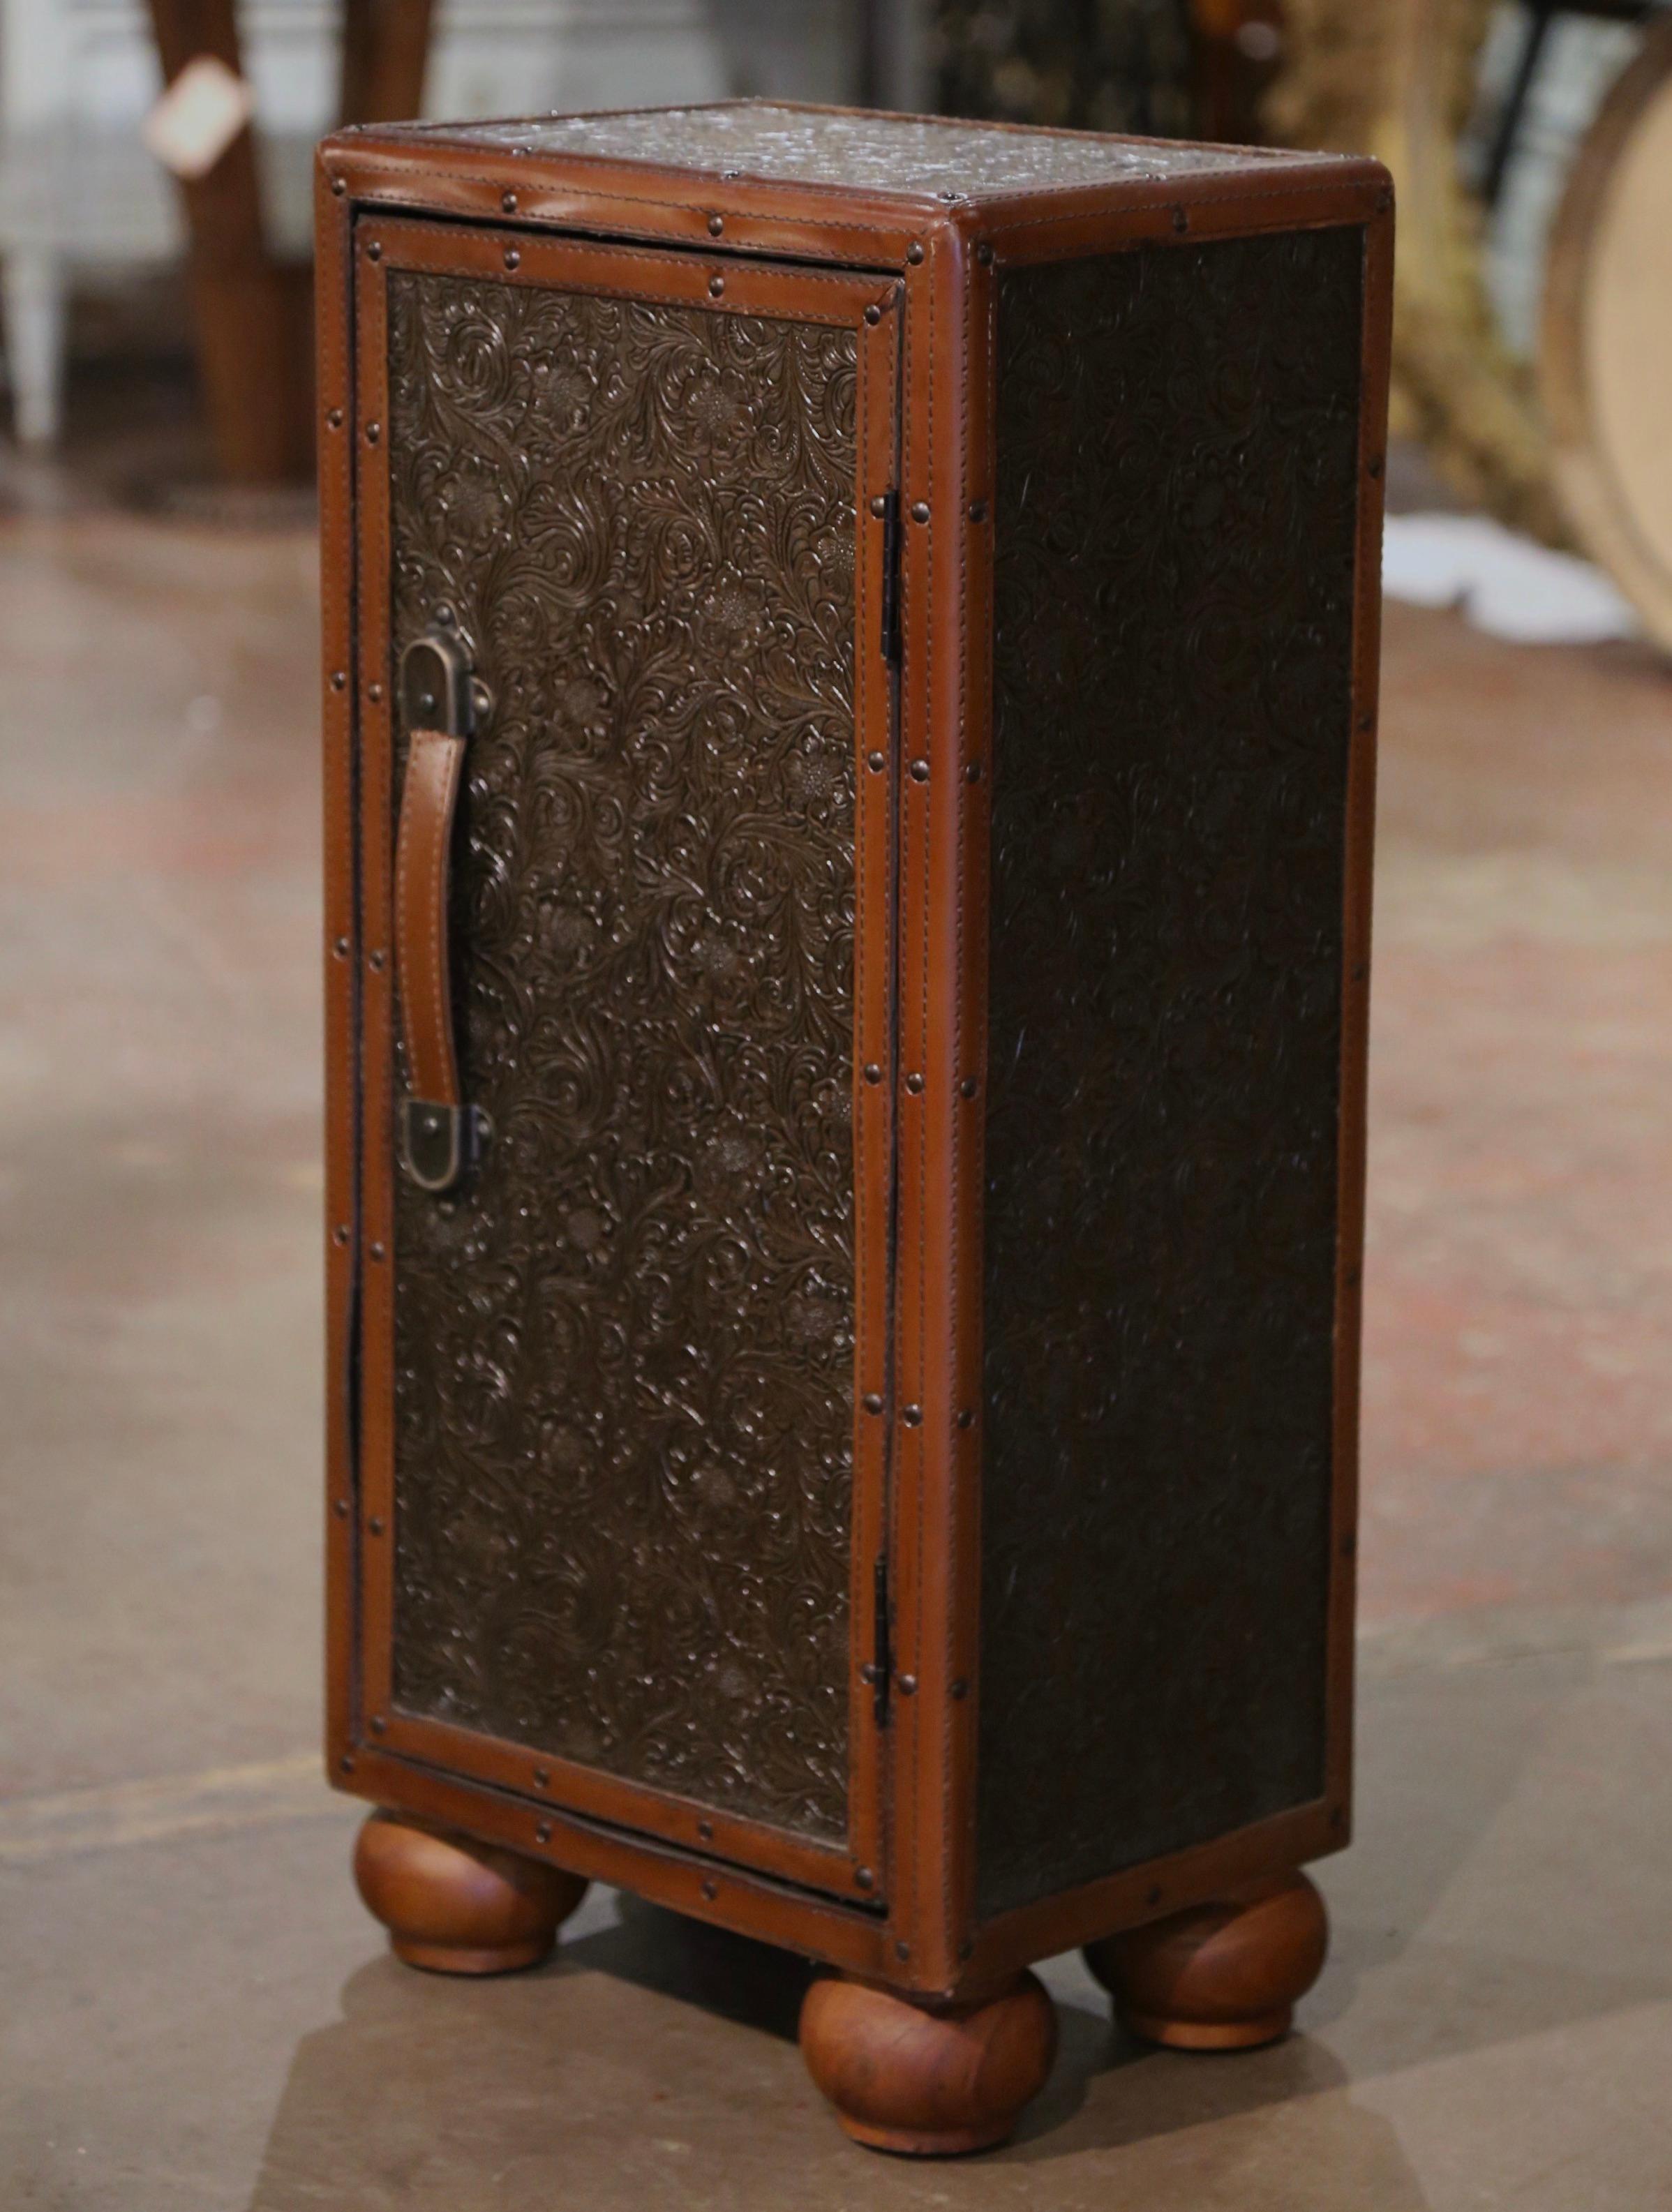 Crafted in Spain circa 1990, the small cabinet stands on bun feet, and is upholstered with a patinated embossed brown leather, embellished with leather straps in each corner. Shaped like a suitcase or trunk, the piece features a center door dressed